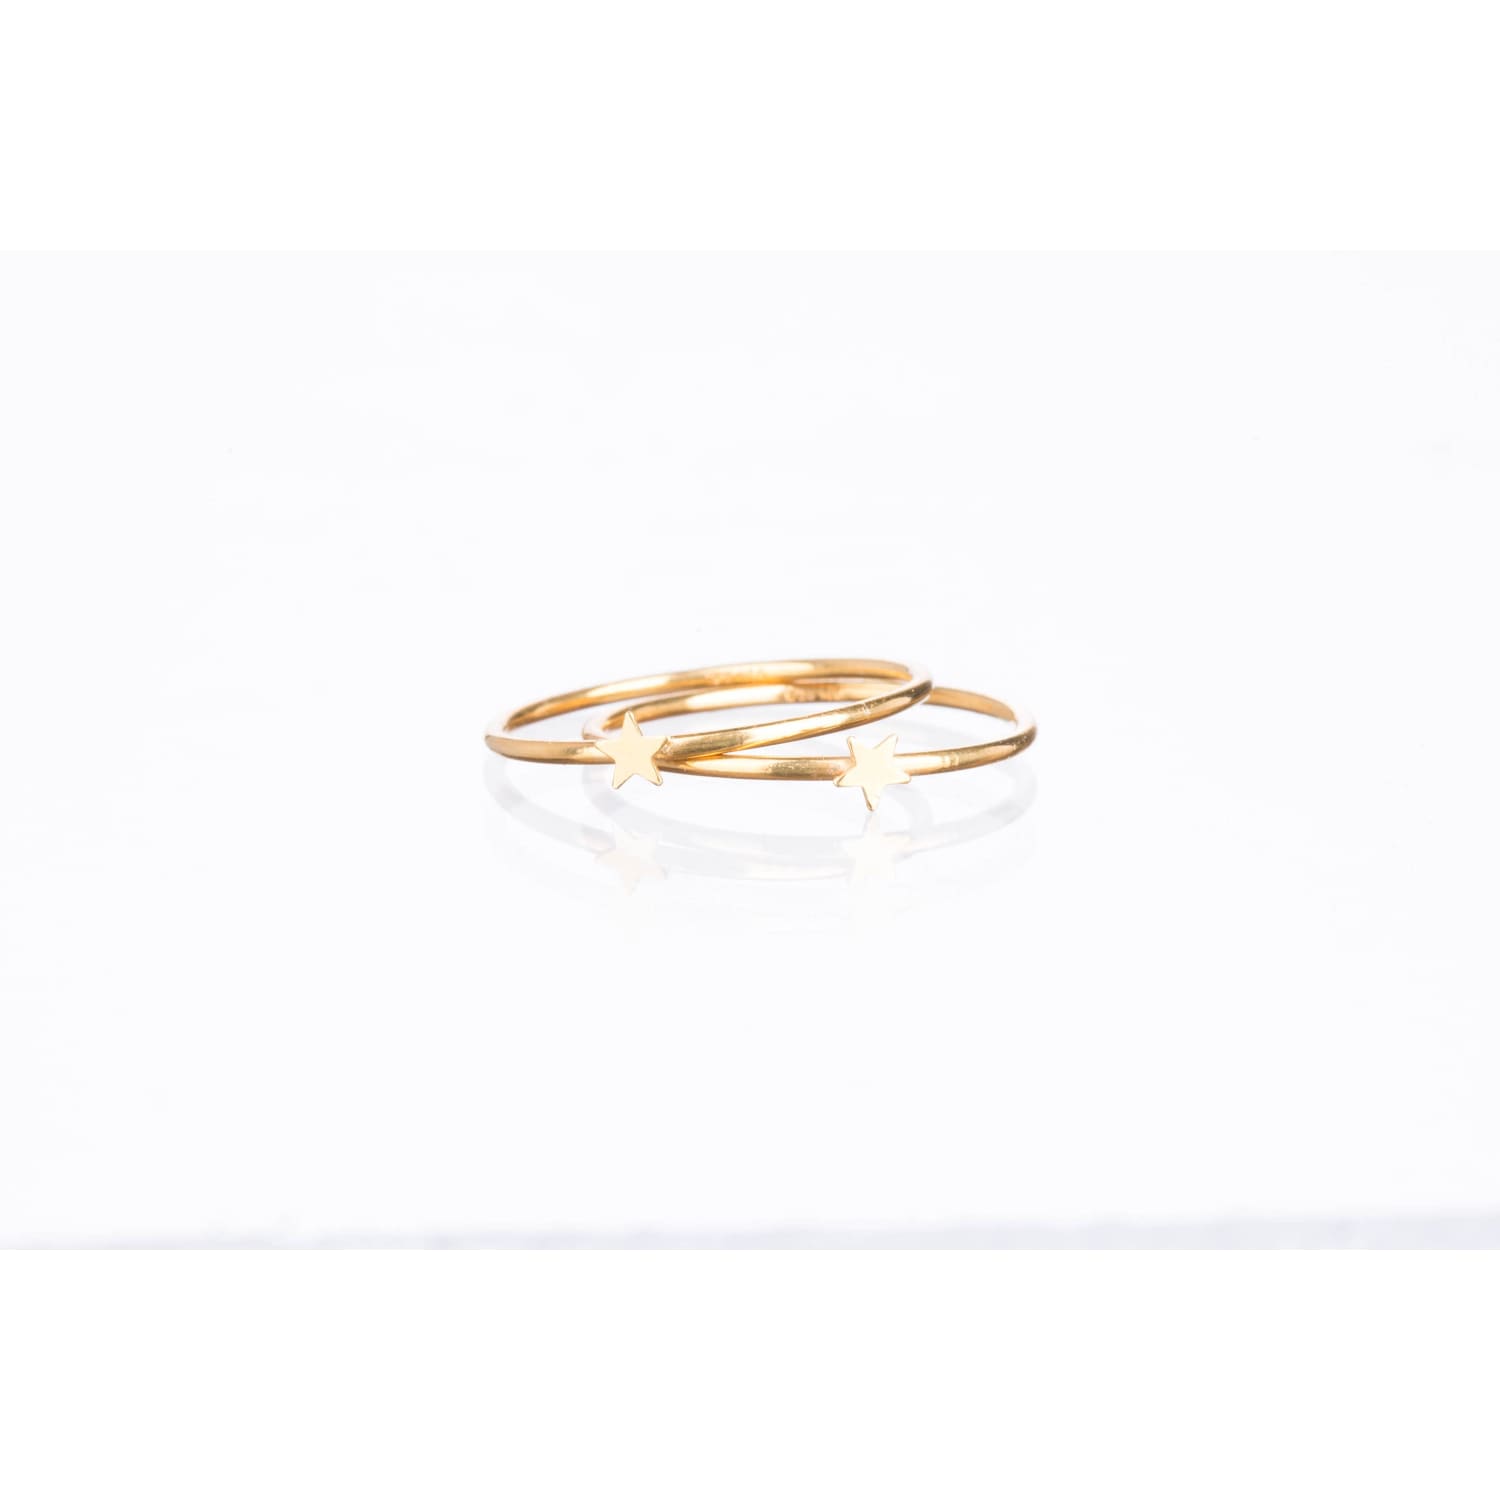 Gold Knot Ring 14k Gold Fill Knot Stacking Ring Gold 